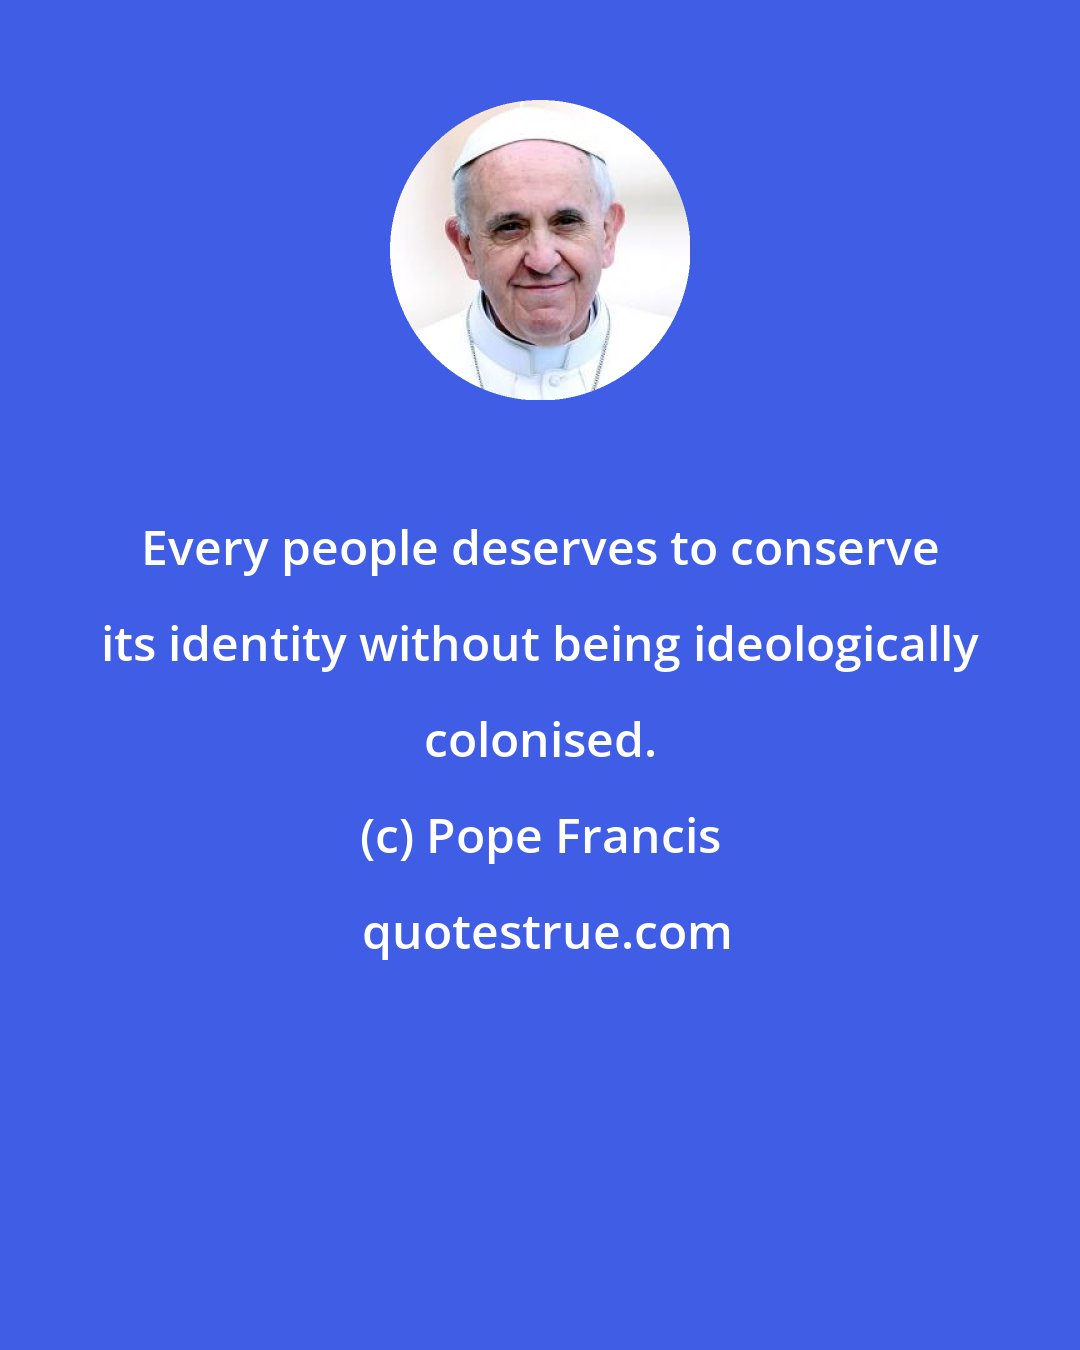 Pope Francis: Every people deserves to conserve its identity without being ideologically colonised.